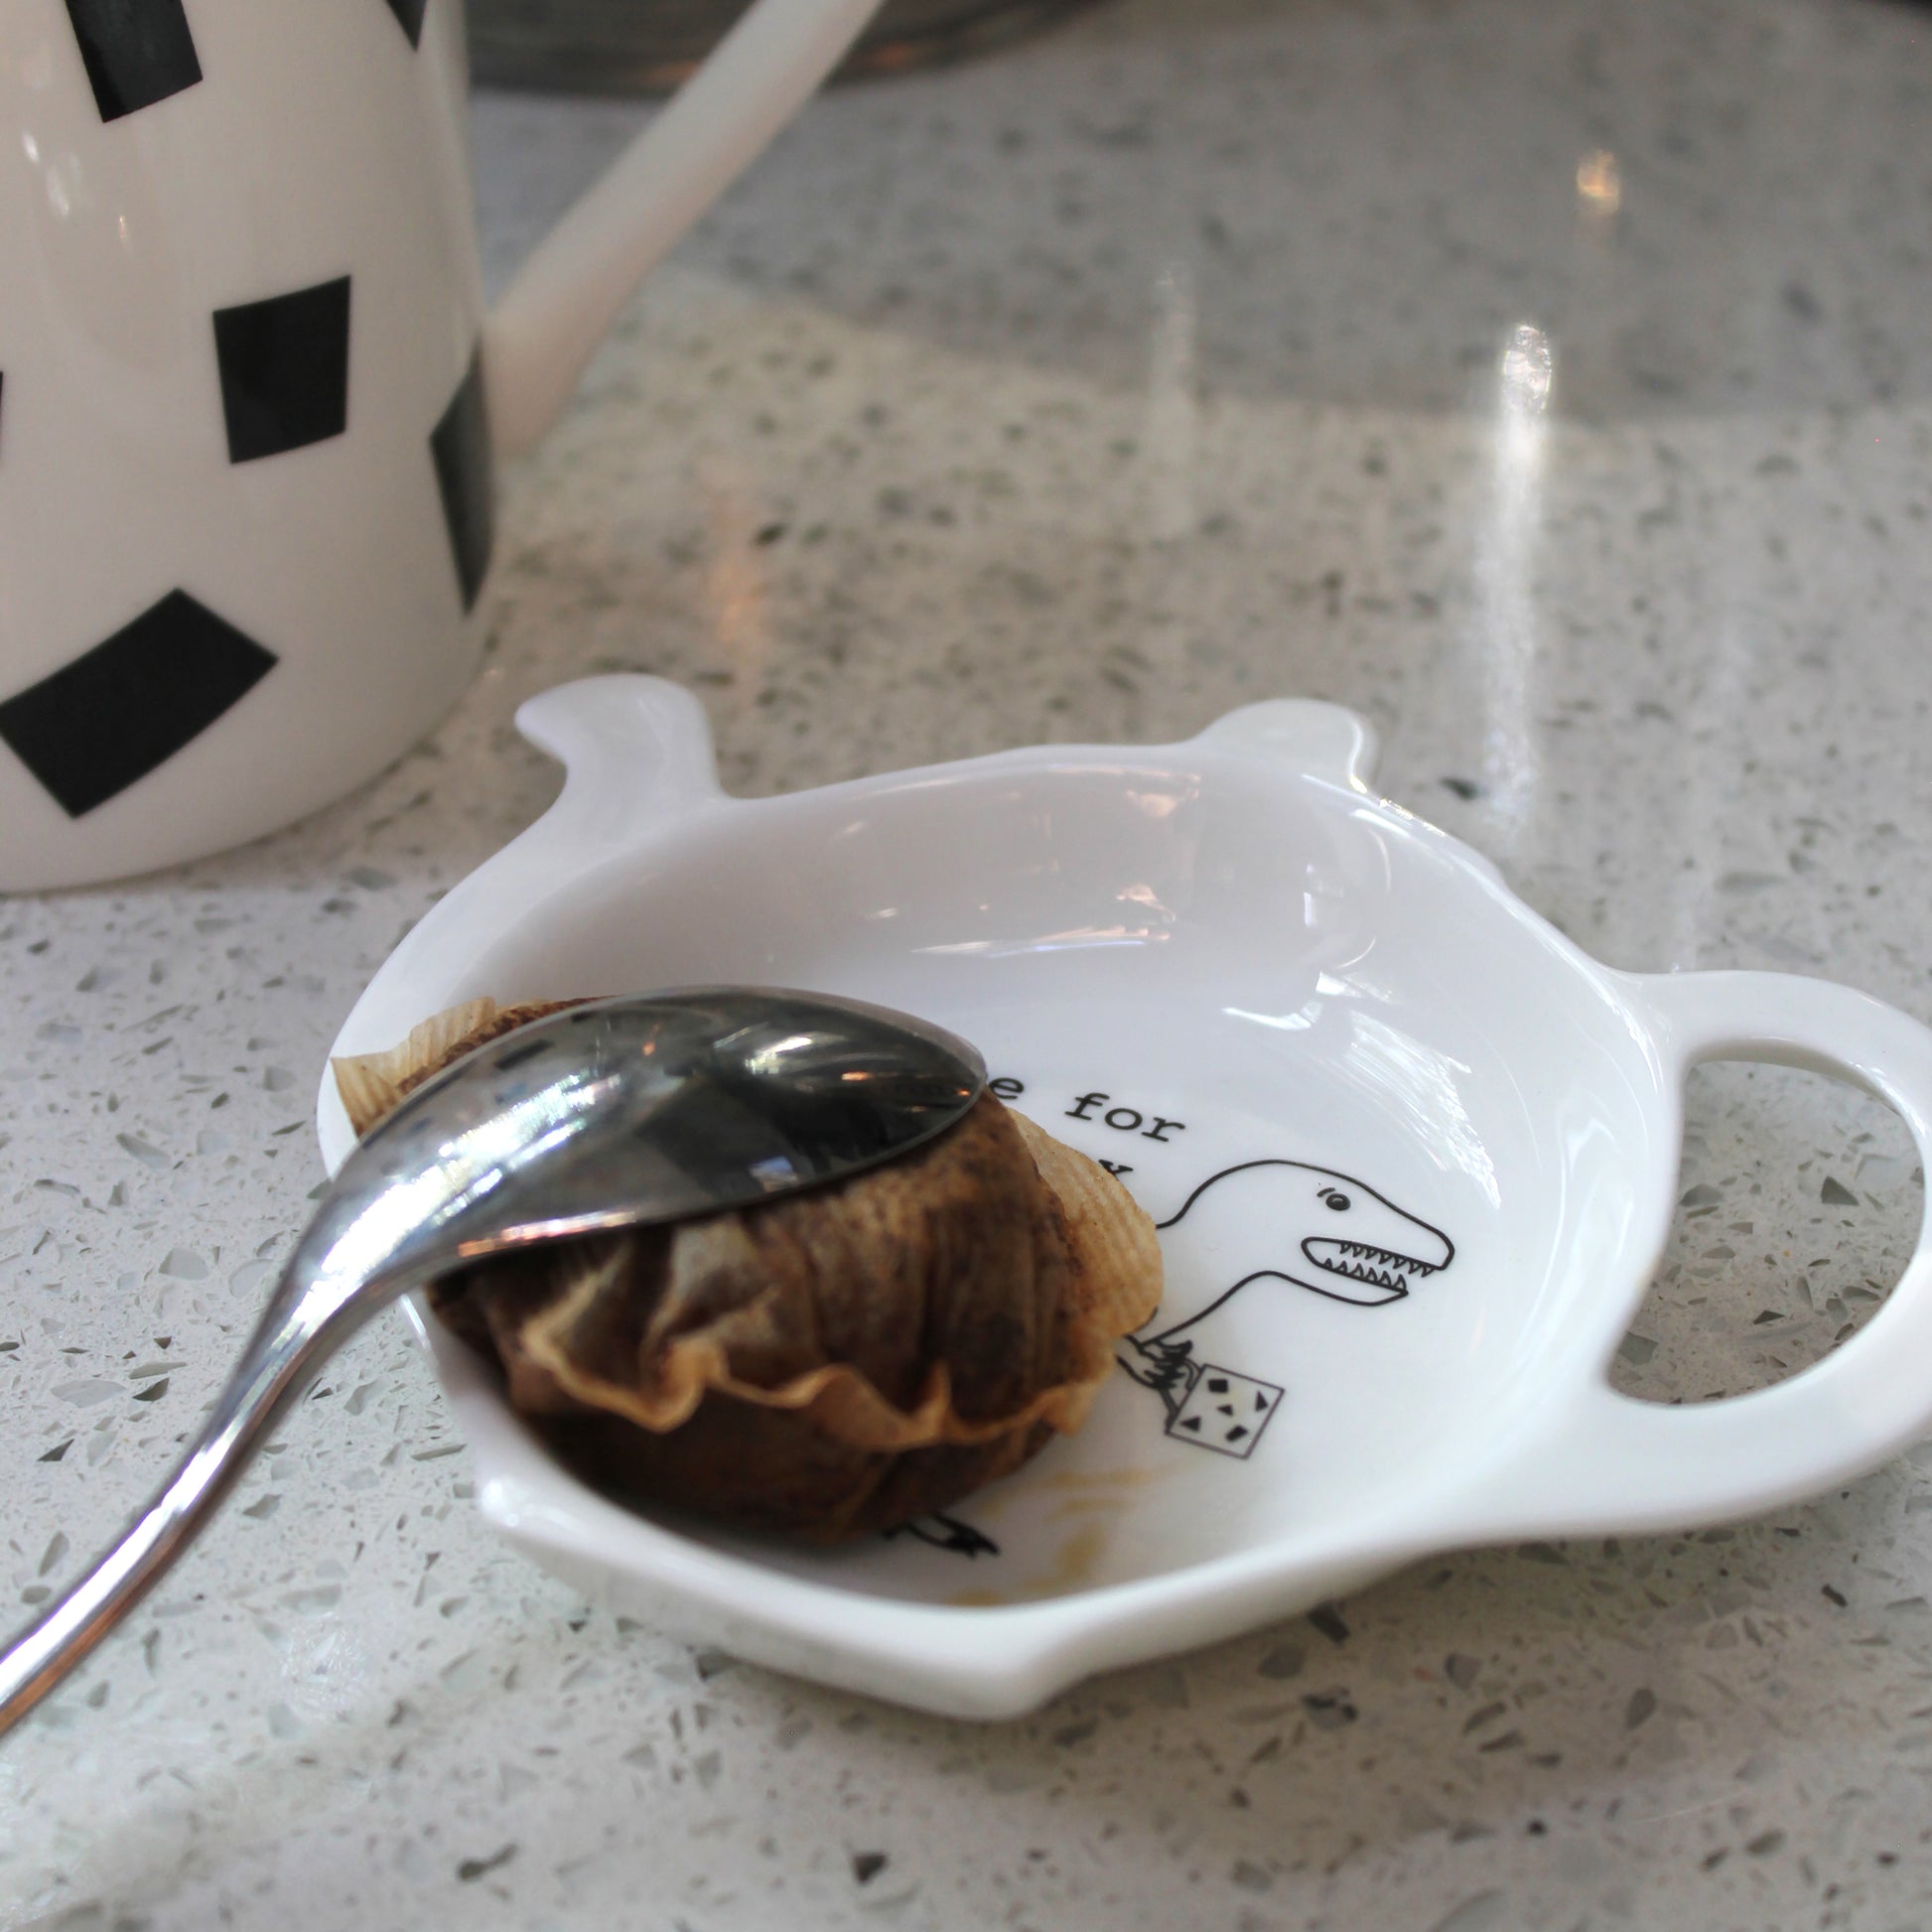 Time for Tea-Rex Teabag Tidy with a teabag and spoon resting on it